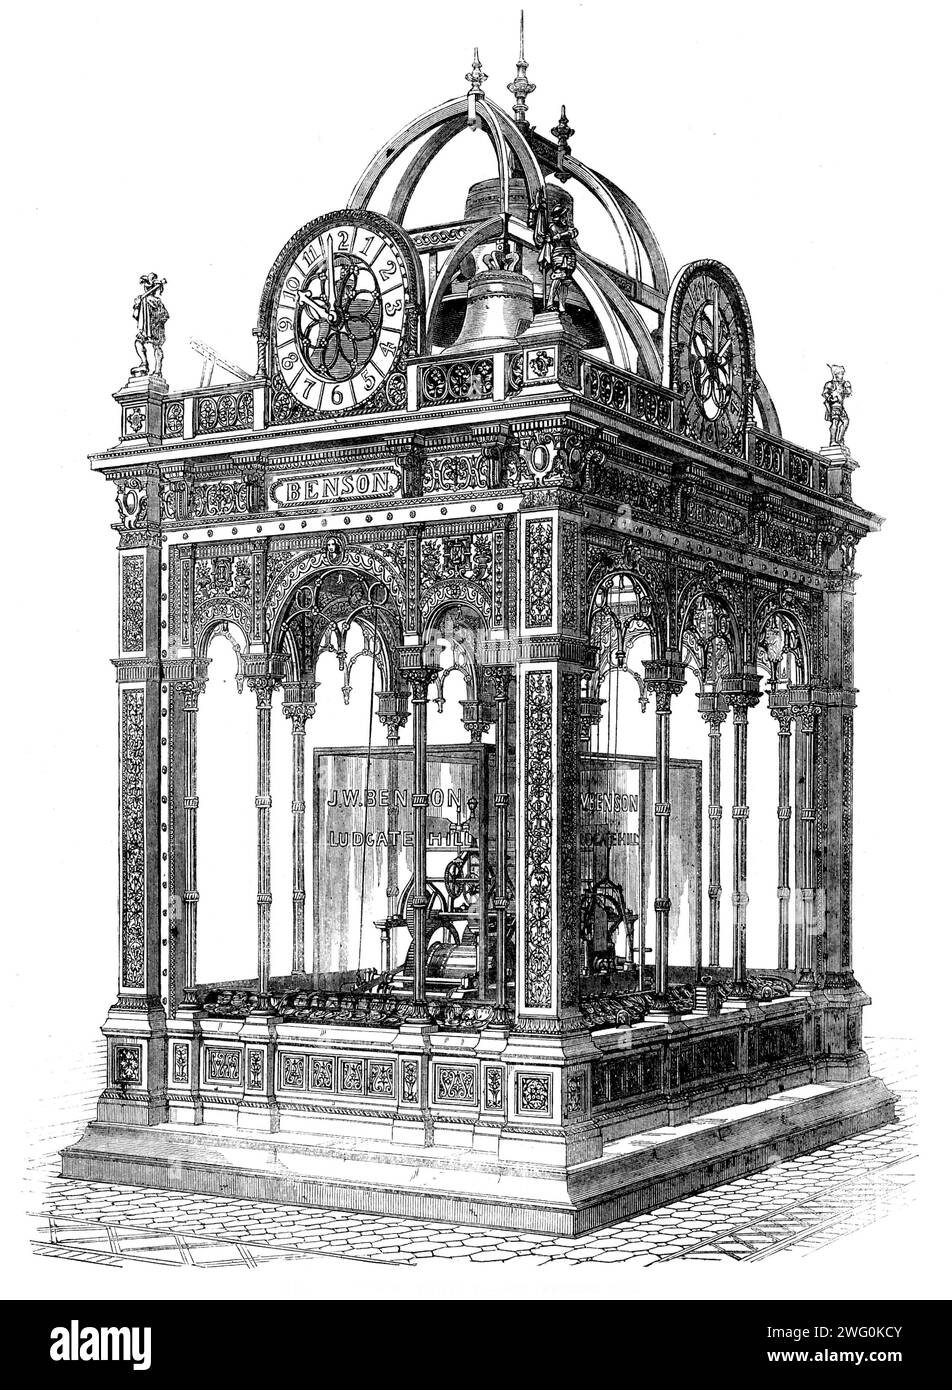 The International Exhibition: Mr. Benson's Trophy, 1862. 'The ornamental case supporting the bells was of carton pierre, strengthened with iron columns and girders...The four dials are of open ironwork, filled in with Minton's encaustic tiles of a bright blue...The movement of this clock, next to that at Westminster, is the largest in the world, and in point of quality of material and finish of workmanship it is unequalled...The three main wheels are each 2ft. in diameter, and cast in the...very finest gunmetal, the teeth being afterwards cut by an engine made expressly for that purpose, The f Stock Photo